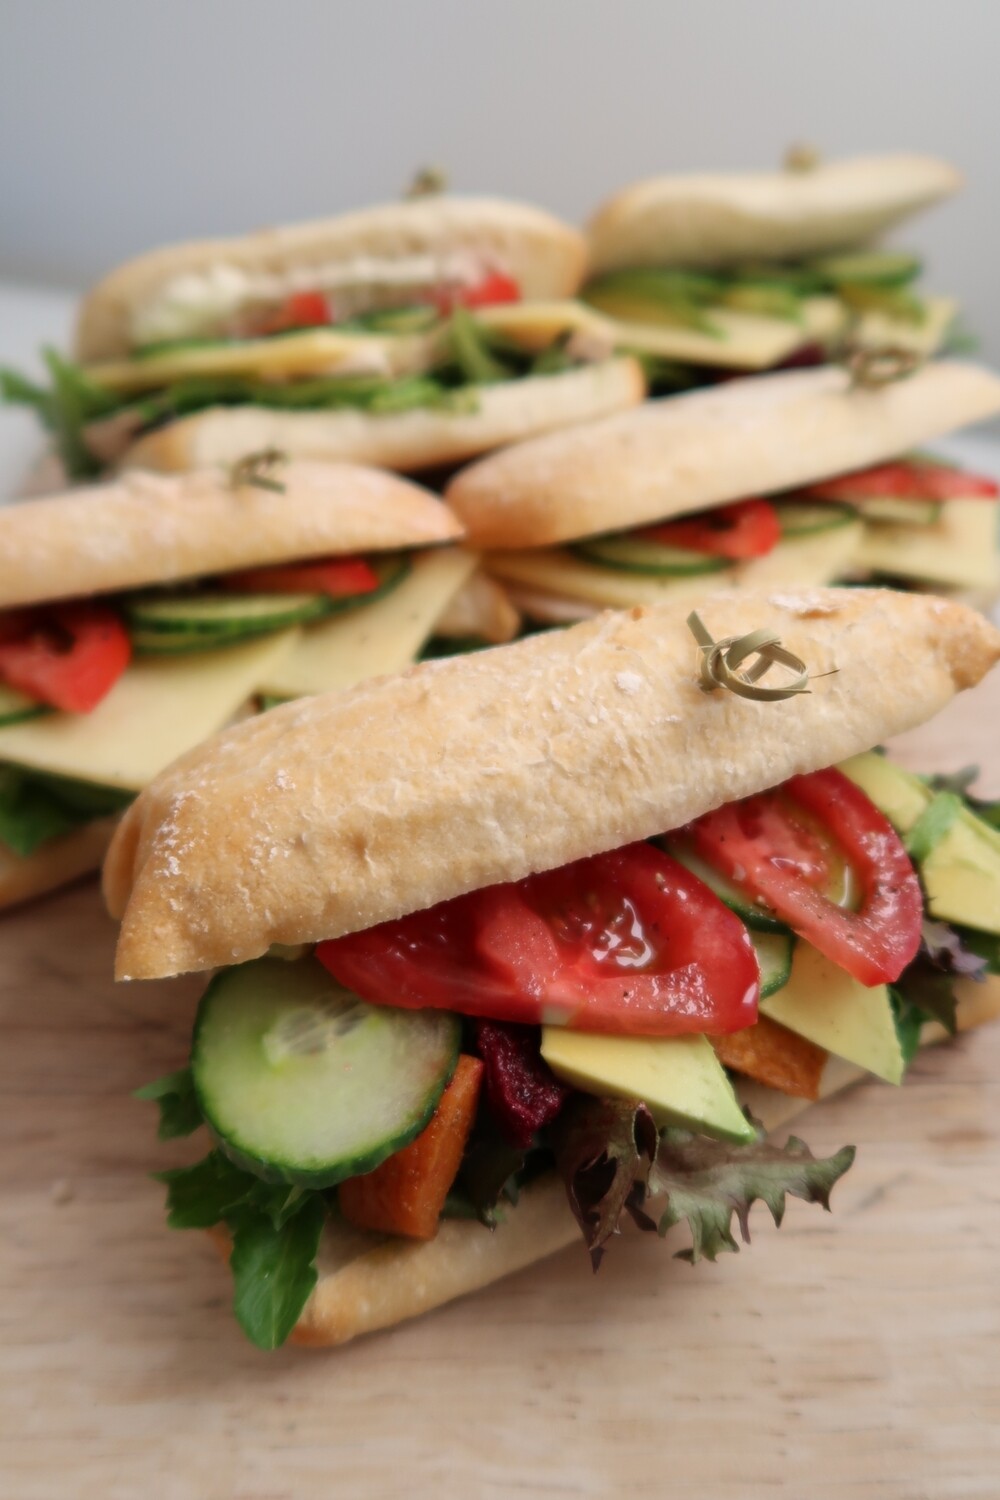 SANDWICH SUBSCRIPTION*: freshly baked Ciabata pocket filled with salad greens, cucumber, tomato and your choice spread and filling. *only available locally, see description